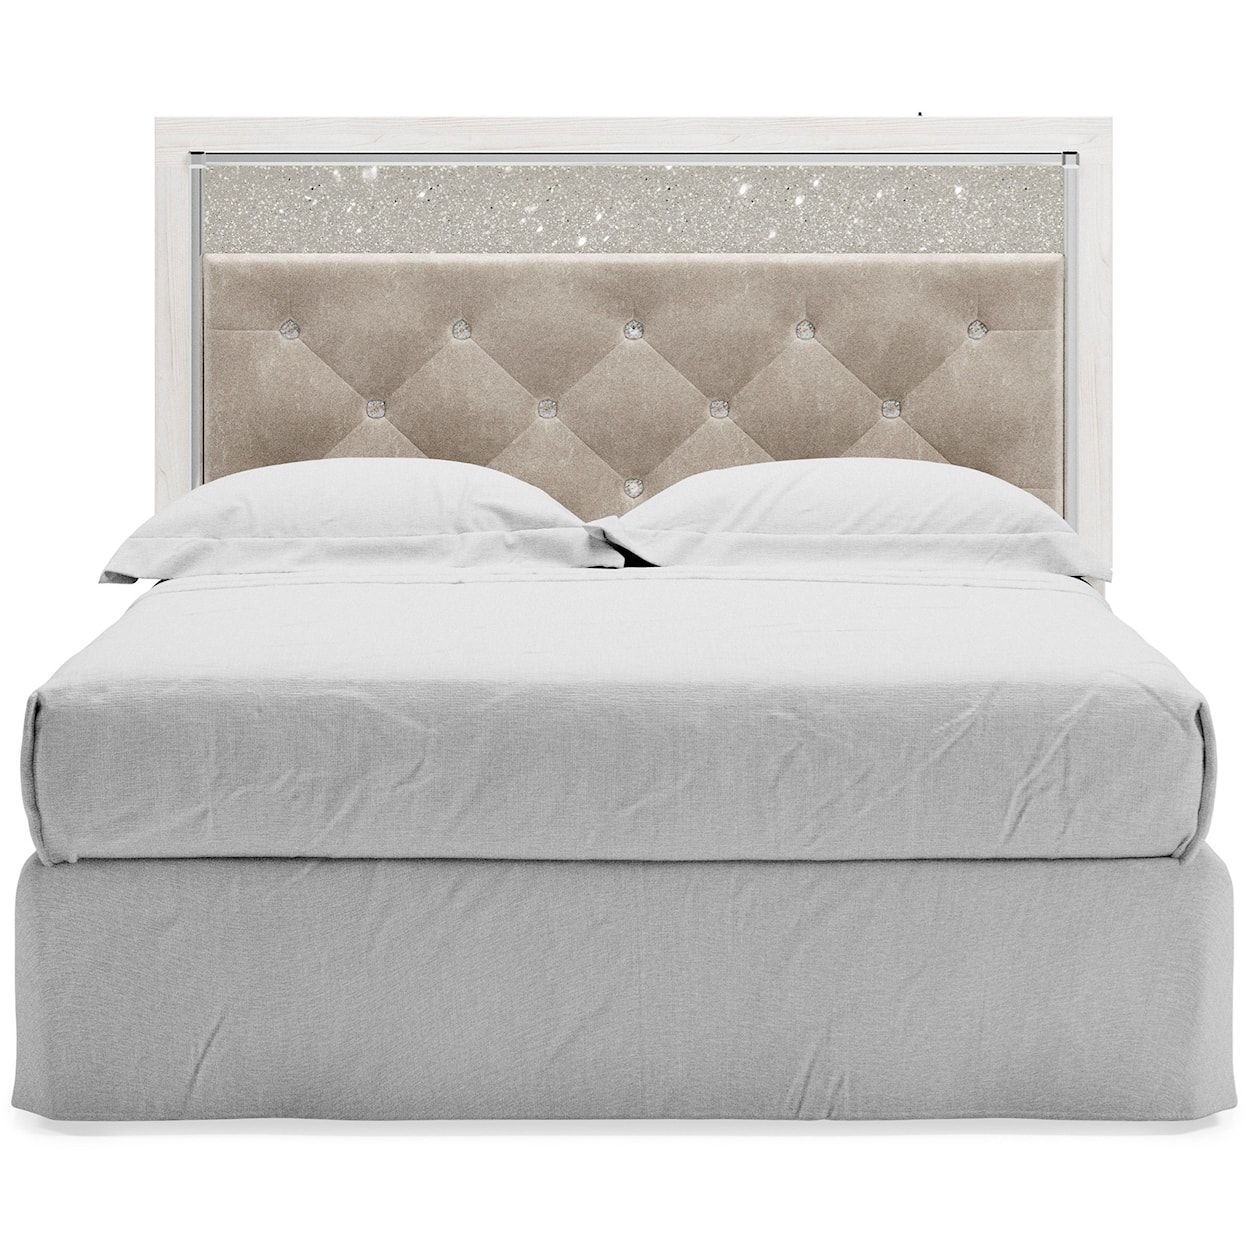 Michael Alan Select Altyra Queen/Full Upholstered Panel Headboard